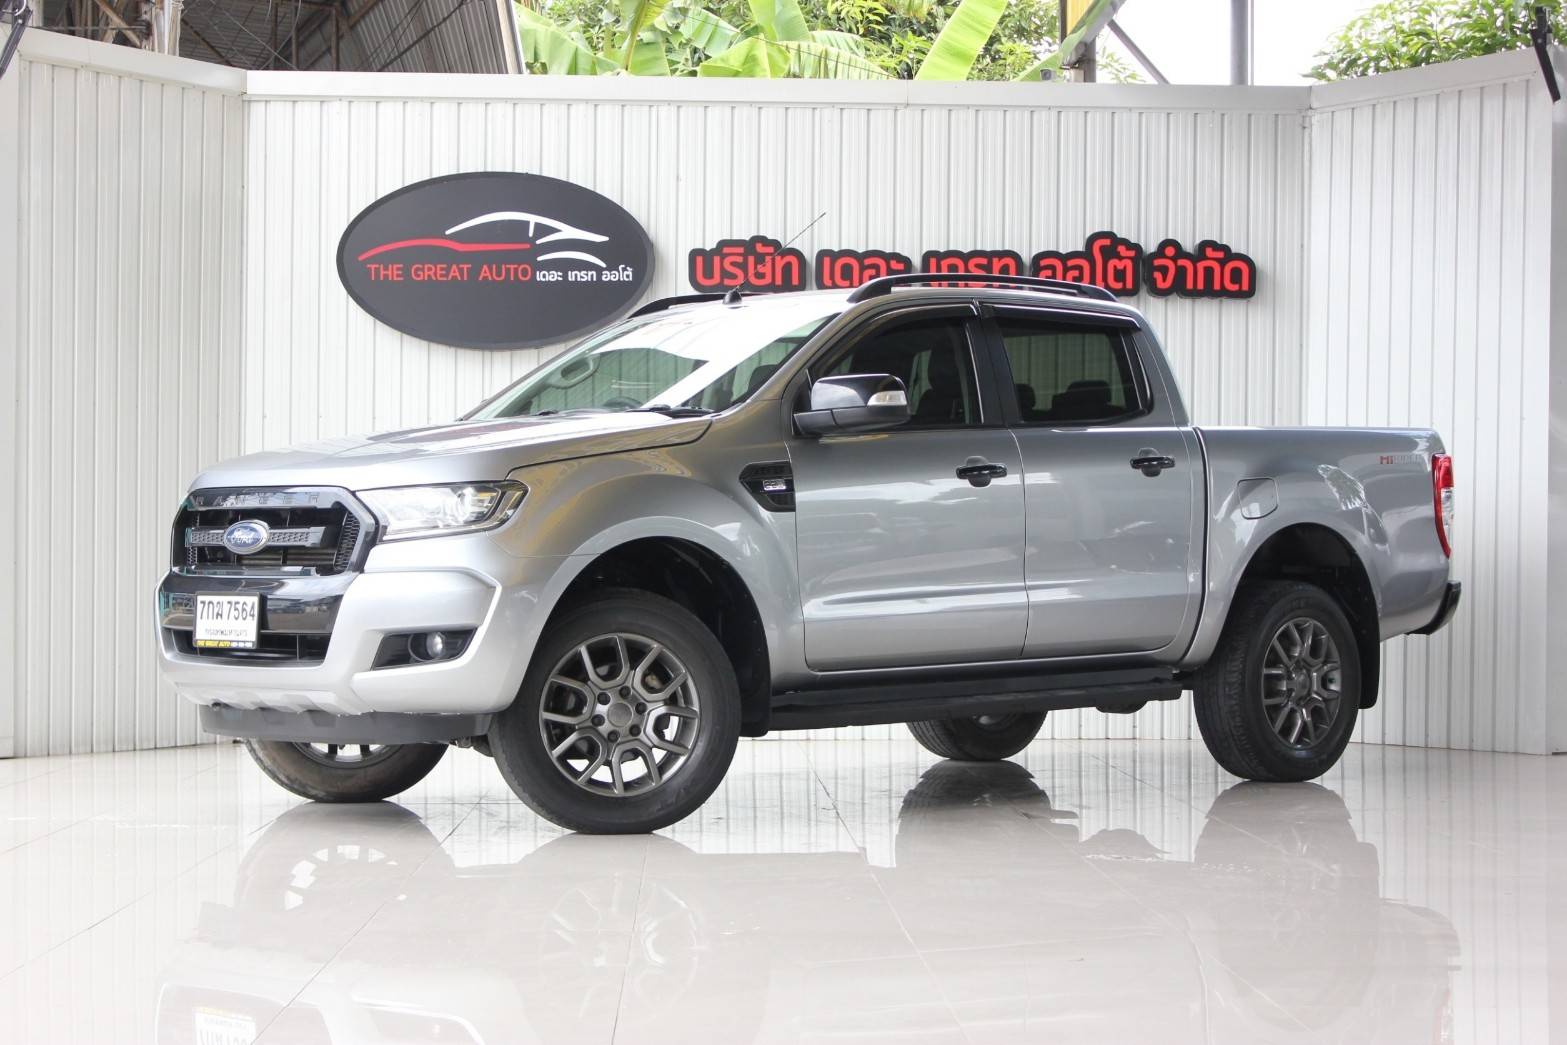 FORD RANGER, 2.24Dr FX4 HI-RIDER DOUBLE CAB ปี 2018  รูปที่ 1